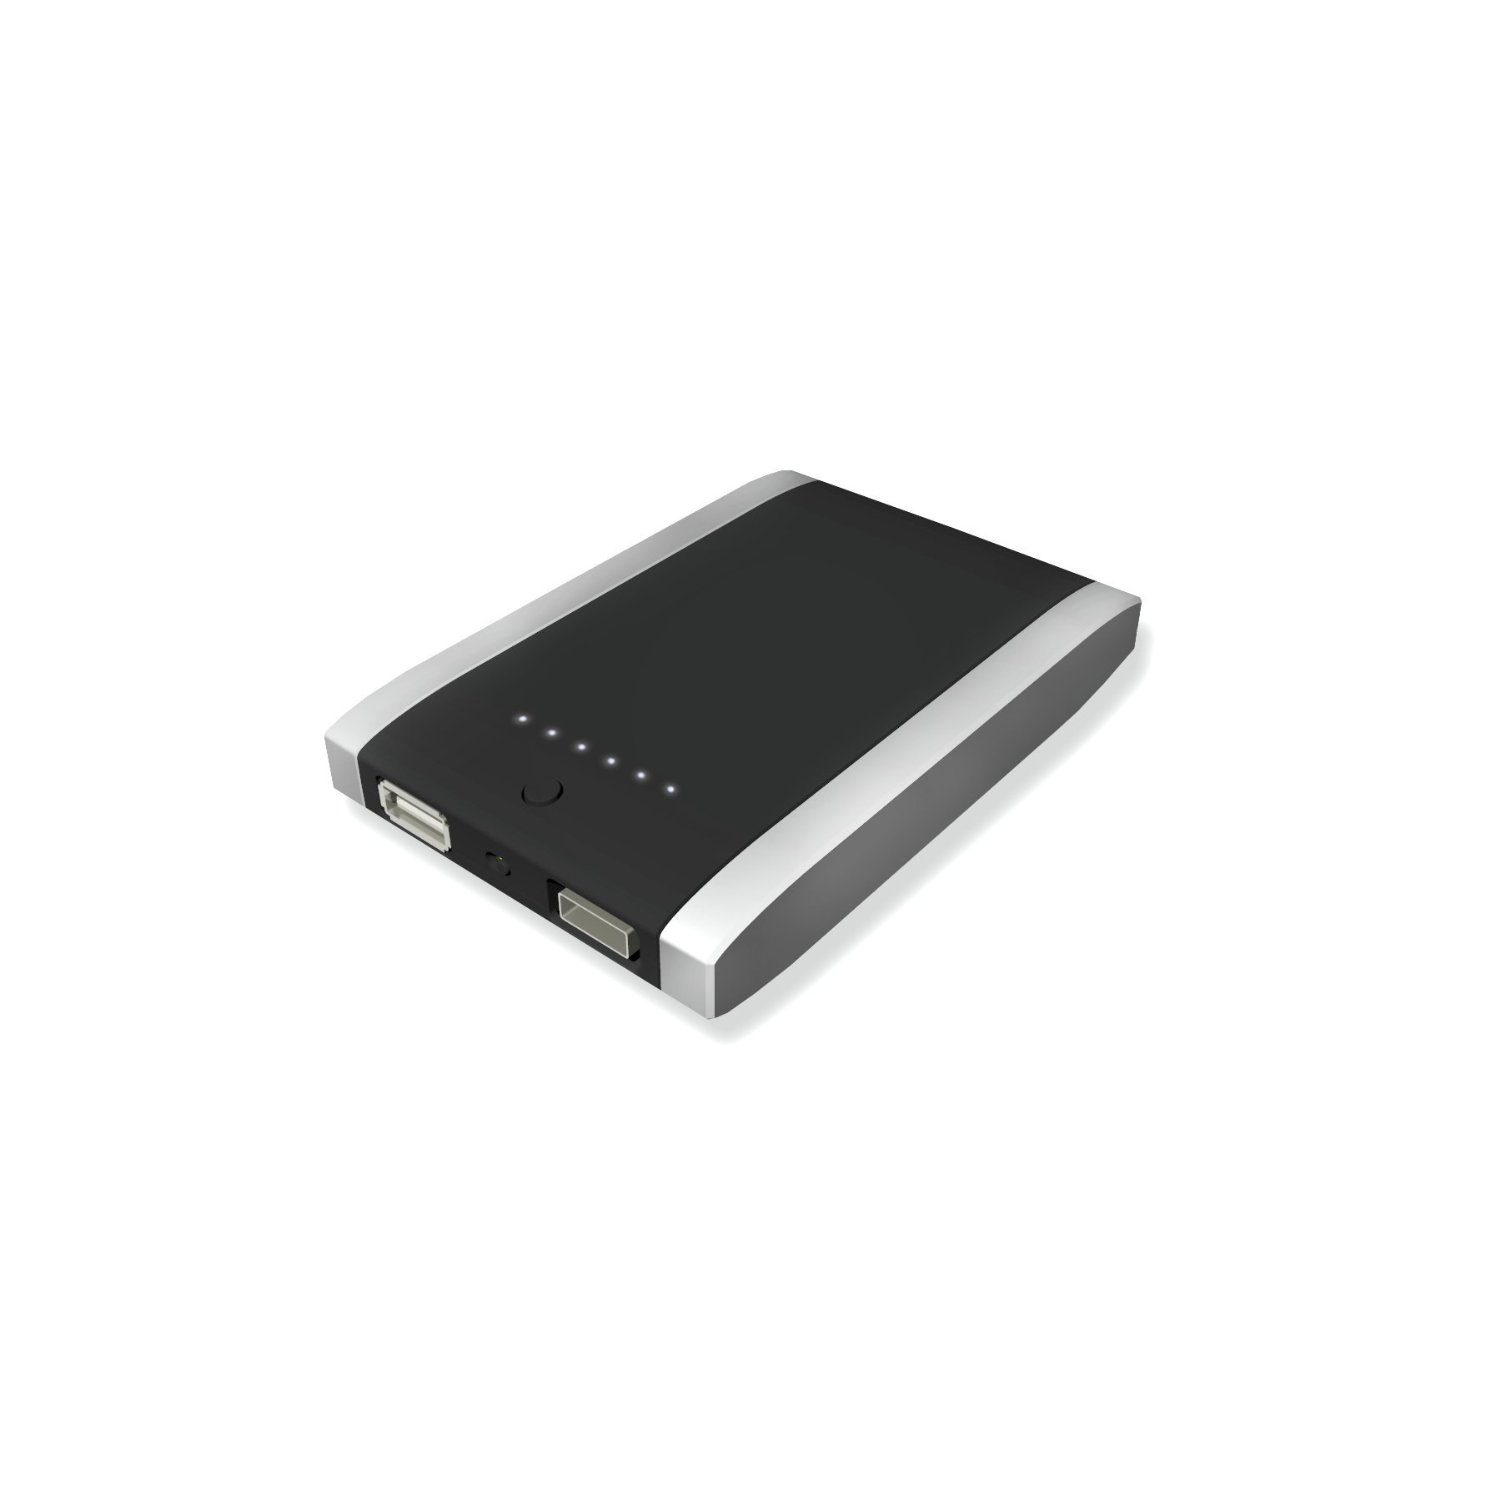 http://thetechjournal.com/wp-content/uploads/images/1109/1316594150-mophie-juice-pack-universal-powerstation-for-ios-devices-3.jpg